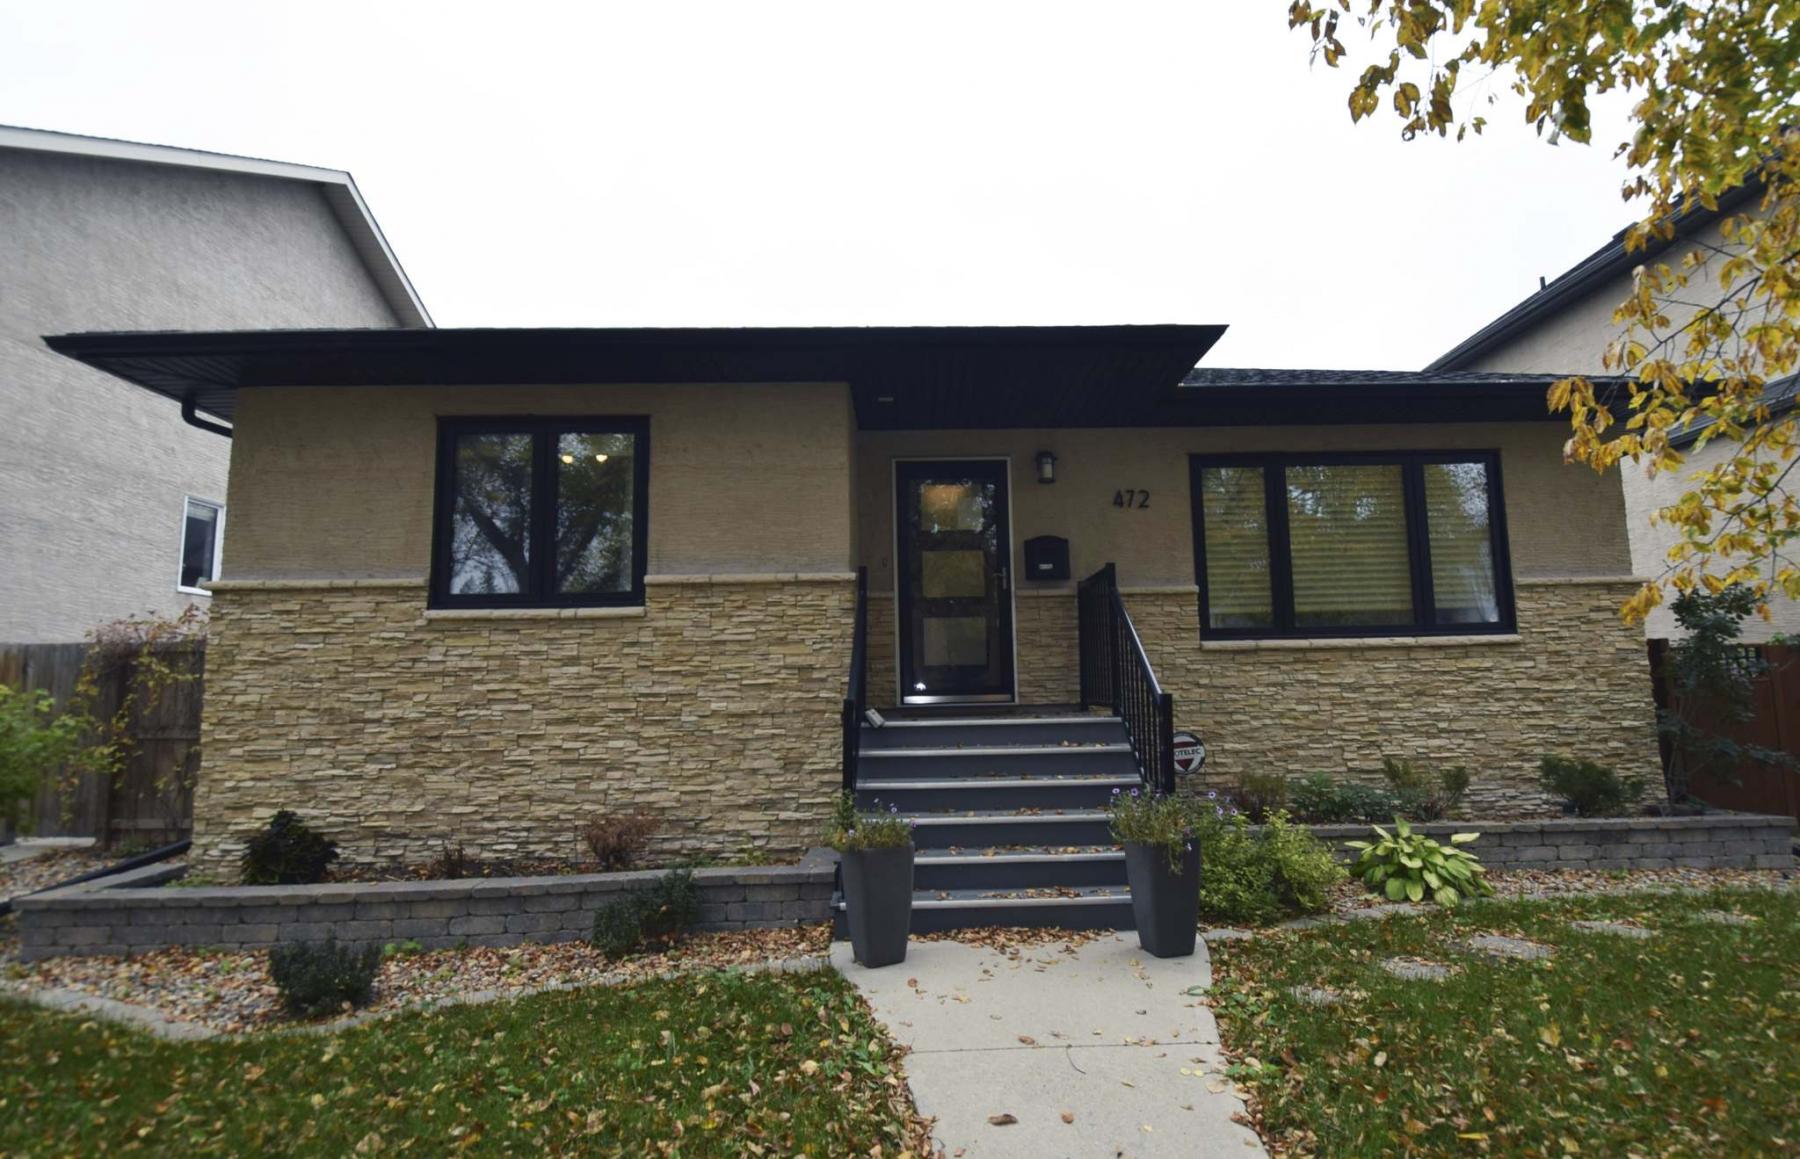 <p>Photos by Todd Lewys / Winnipeg Free Press</p><p>Built in 2012, this large bungalow matches the area perfectly and features more than 3,200 square-feet of livable space.</p>